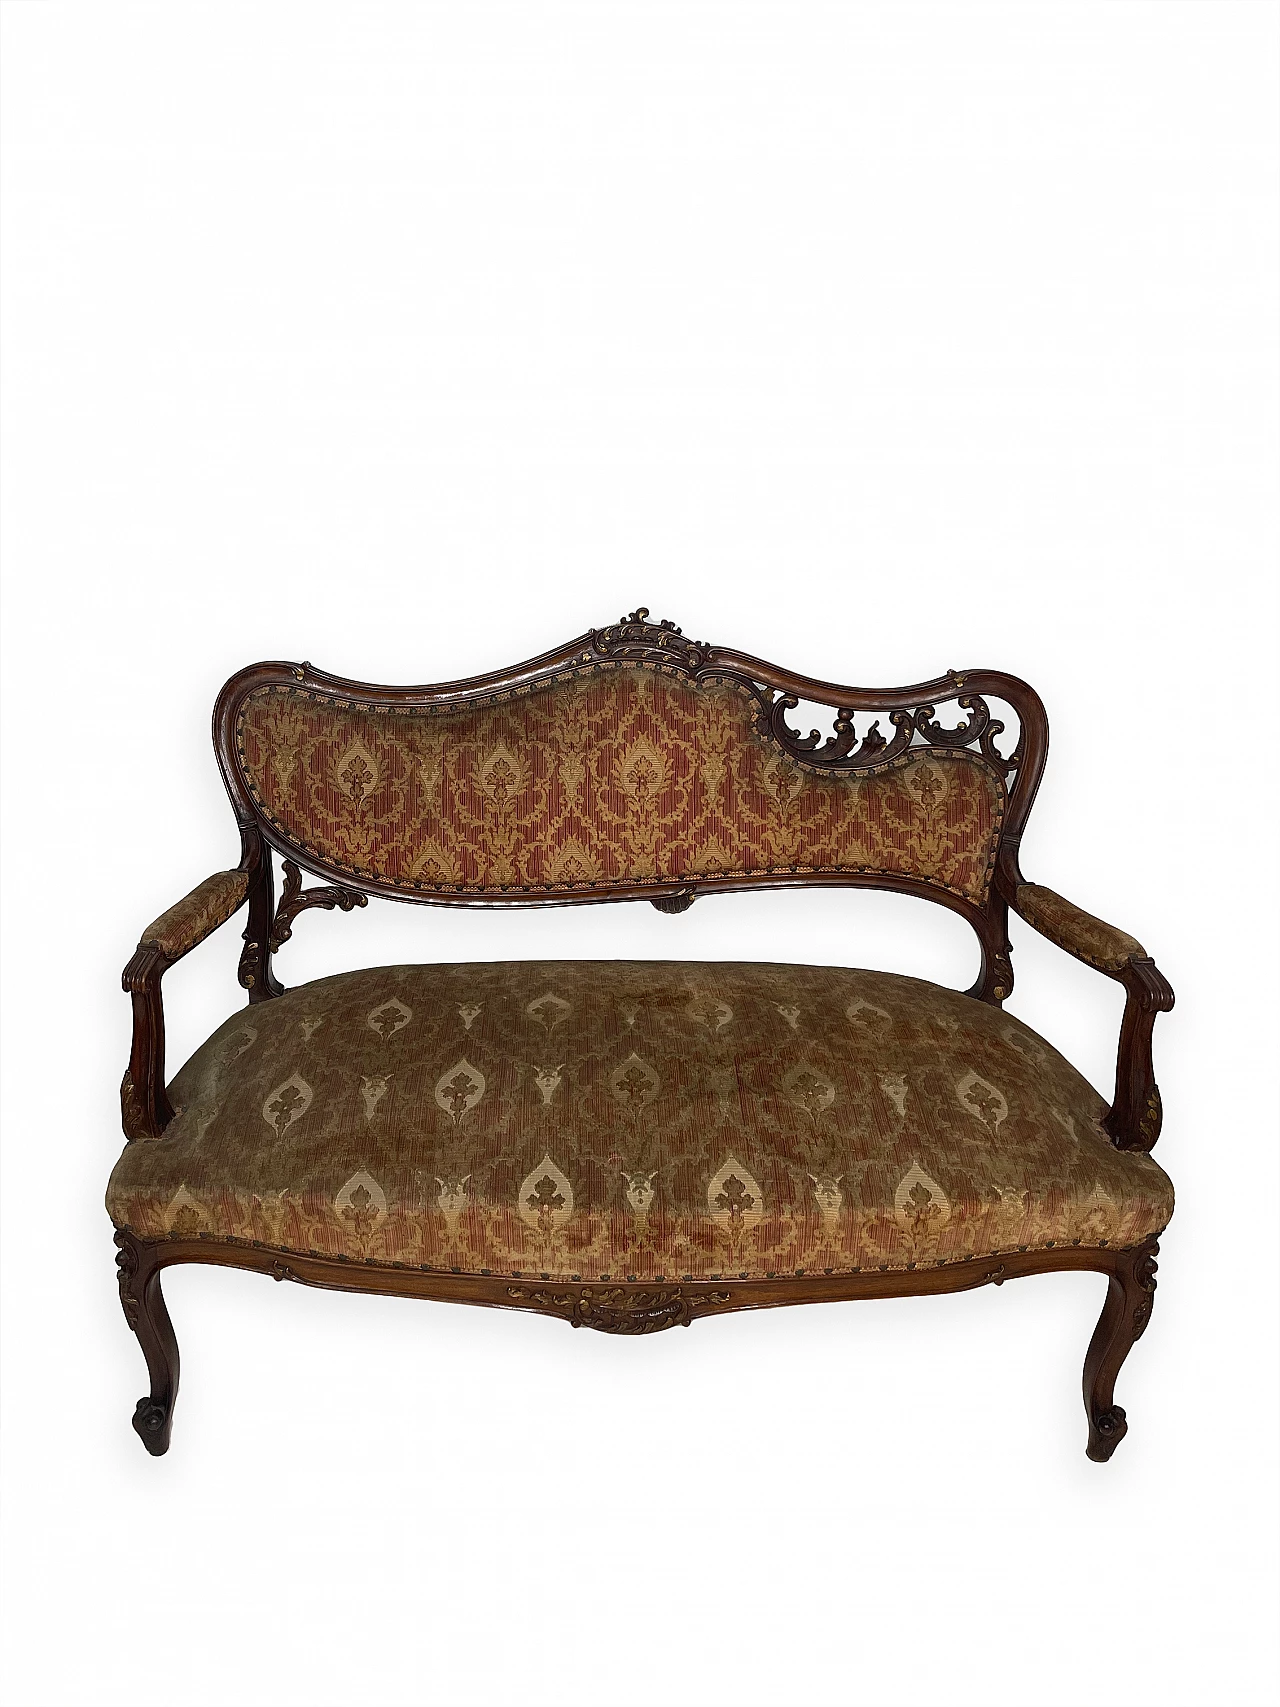 Rocaille-patterned wooden sofa, early 20th century 4